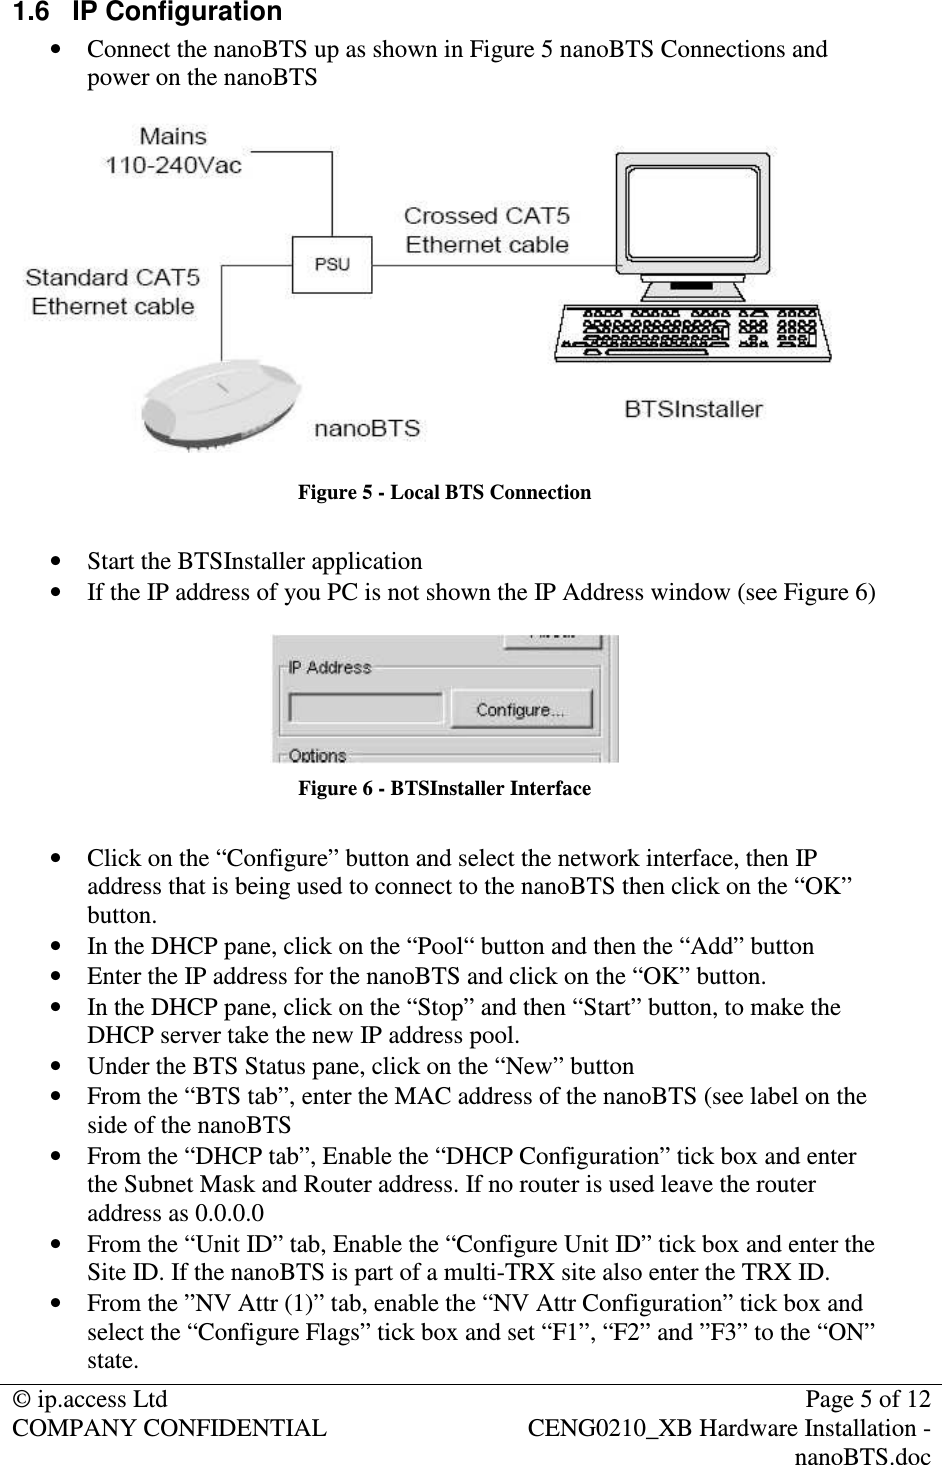 © ip.access Ltd  Page 5 of 12 COMPANY CONFIDENTIAL  CENG0210_XB Hardware Installation - nanoBTS.doc  1.6  IP Configuration •  Connect the nanoBTS up as shown in Figure 5 nanoBTS Connections and power on the nanoBTS  Figure 5 - Local BTS Connection  •  Start the BTSInstaller application •  If the IP address of you PC is not shown the IP Address window (see Figure 6)   Figure 6 - BTSInstaller Interface  •  Click on the “Configure” button and select the network interface, then IP address that is being used to connect to the nanoBTS then click on the “OK” button. •  In the DHCP pane, click on the “Pool“ button and then the “Add” button •  Enter the IP address for the nanoBTS and click on the “OK” button. •  In the DHCP pane, click on the “Stop” and then “Start” button, to make the DHCP server take the new IP address pool. •  Under the BTS Status pane, click on the “New” button •  From the “BTS tab”, enter the MAC address of the nanoBTS (see label on the side of the nanoBTS •  From the “DHCP tab”, Enable the “DHCP Configuration” tick box and enter the Subnet Mask and Router address. If no router is used leave the router address as 0.0.0.0 •  From the “Unit ID” tab, Enable the “Configure Unit ID” tick box and enter the Site ID. If the nanoBTS is part of a multi-TRX site also enter the TRX ID. •  From the ”NV Attr (1)” tab, enable the “NV Attr Configuration” tick box and select the “Configure Flags” tick box and set “F1”, “F2” and ”F3” to the “ON” state. 